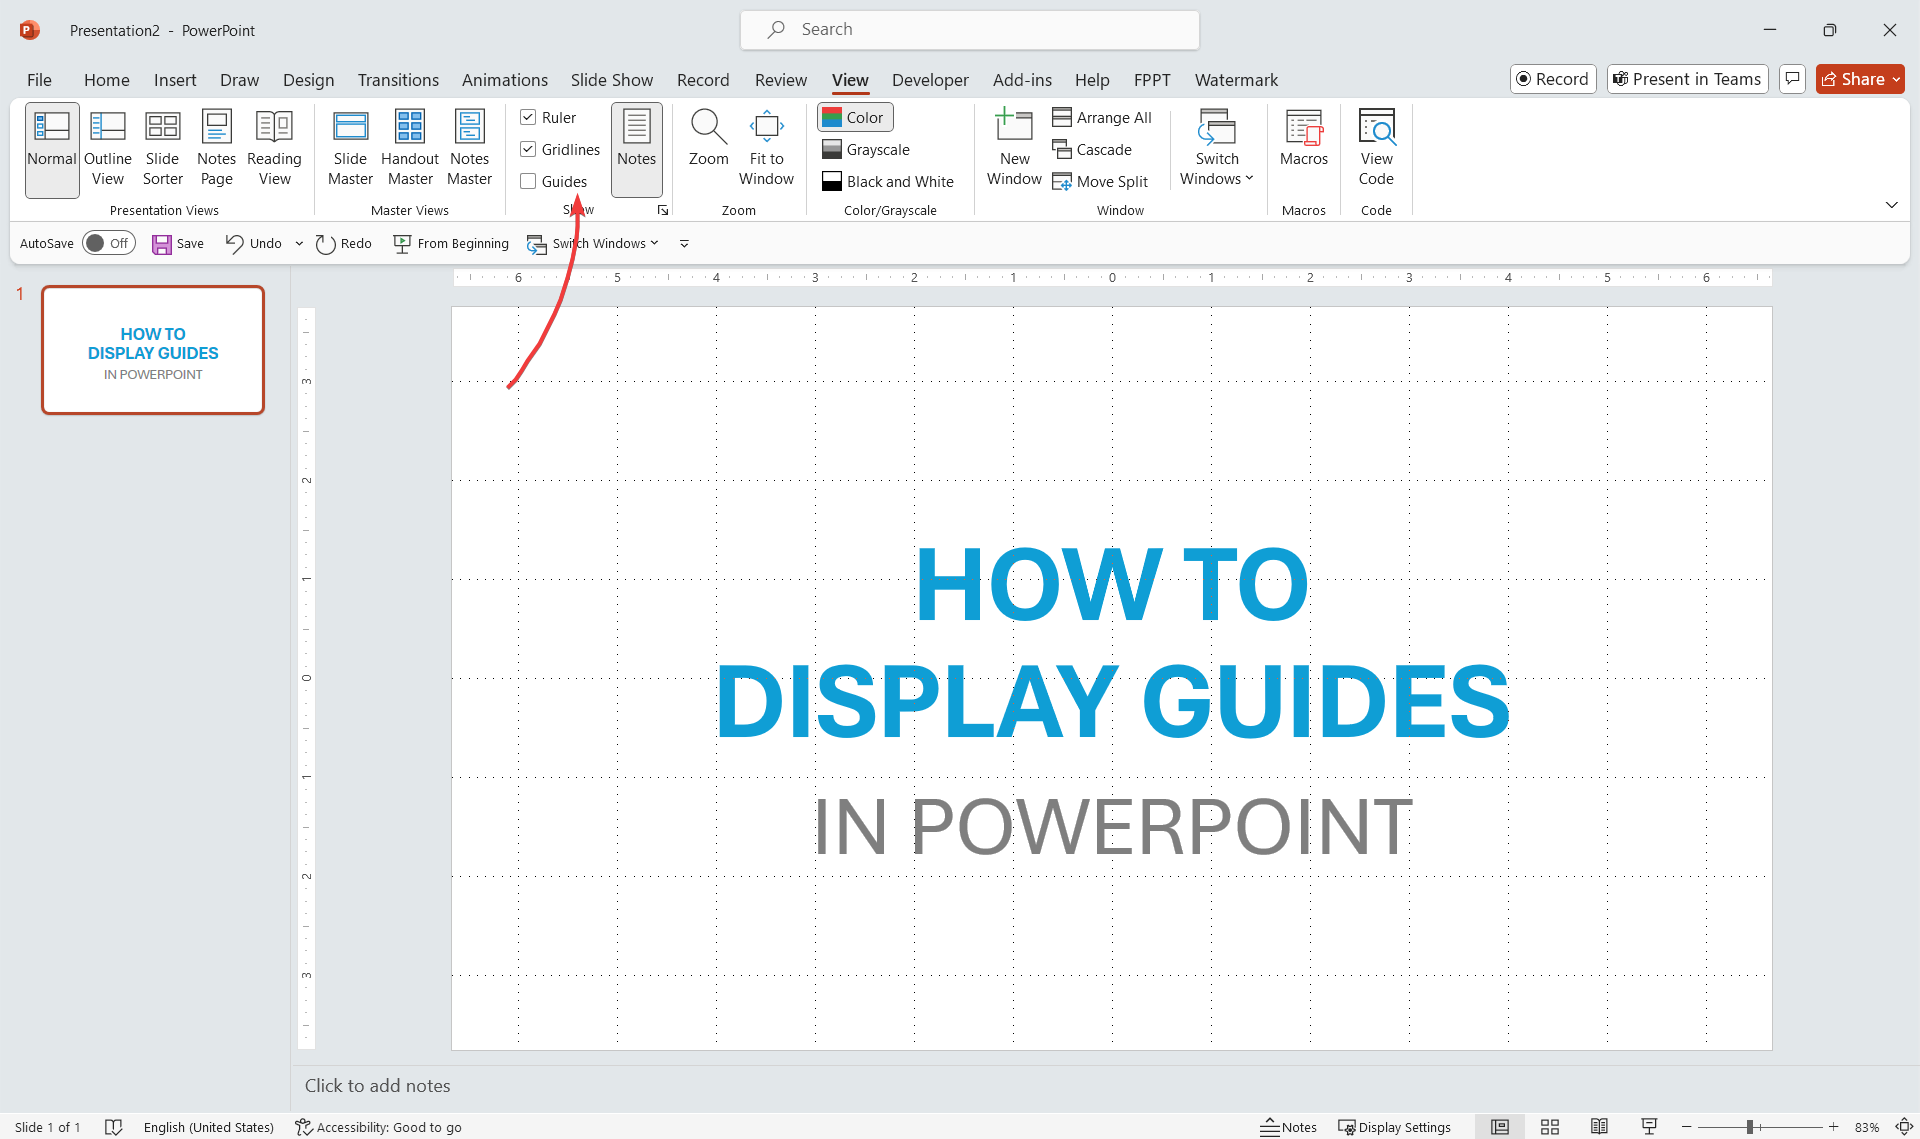 How To Display Guides in PowerPoint